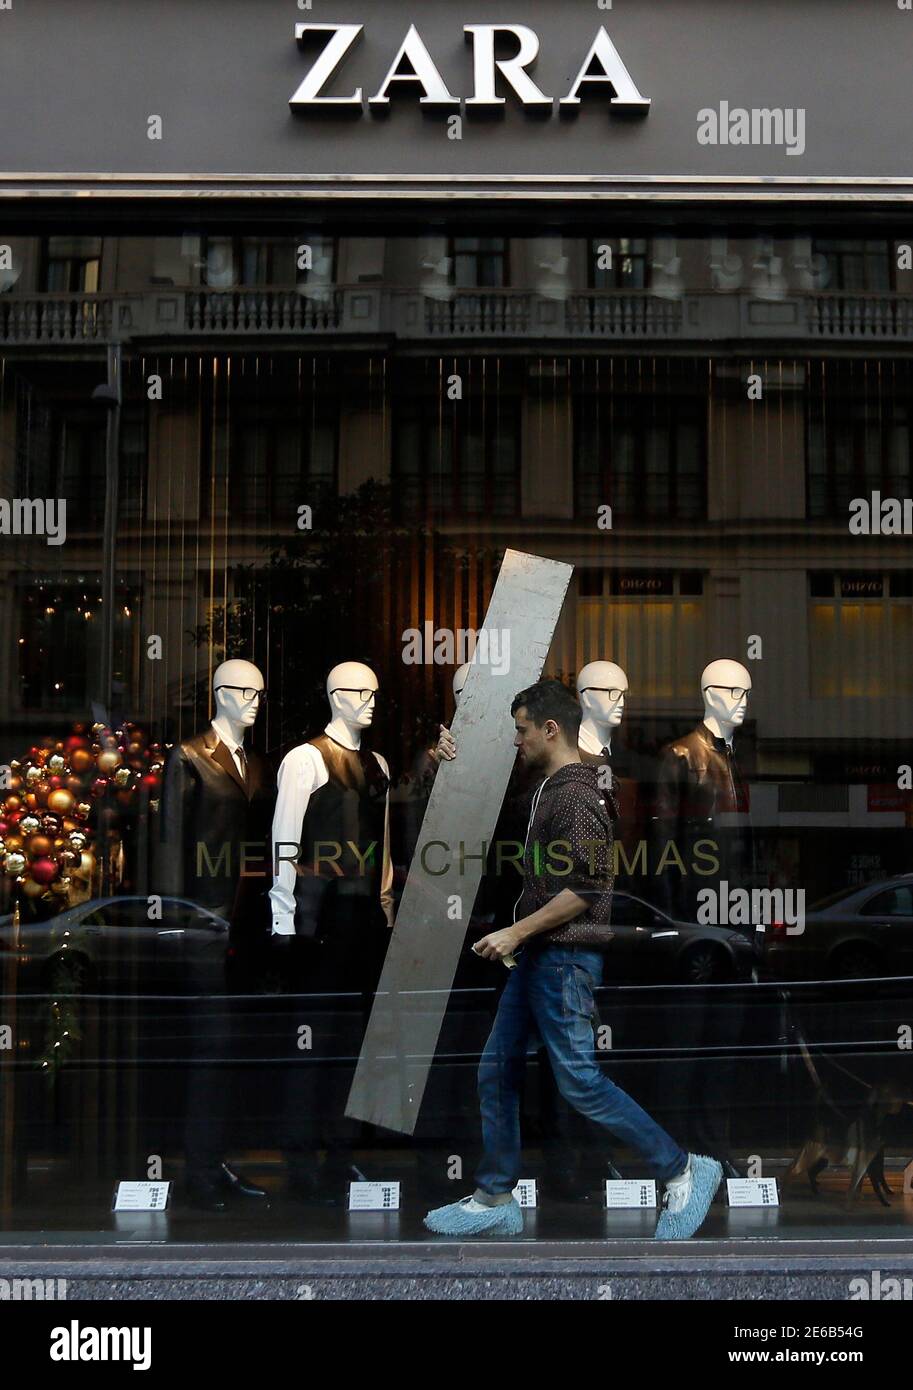 A man works inside a shop window of a Zara store in downtown Madrid  December 12, 2012. Spain's Zara owner Inditex shrugged off sluggish  spending in austerity-wracked Europe on Wednesday, posting a